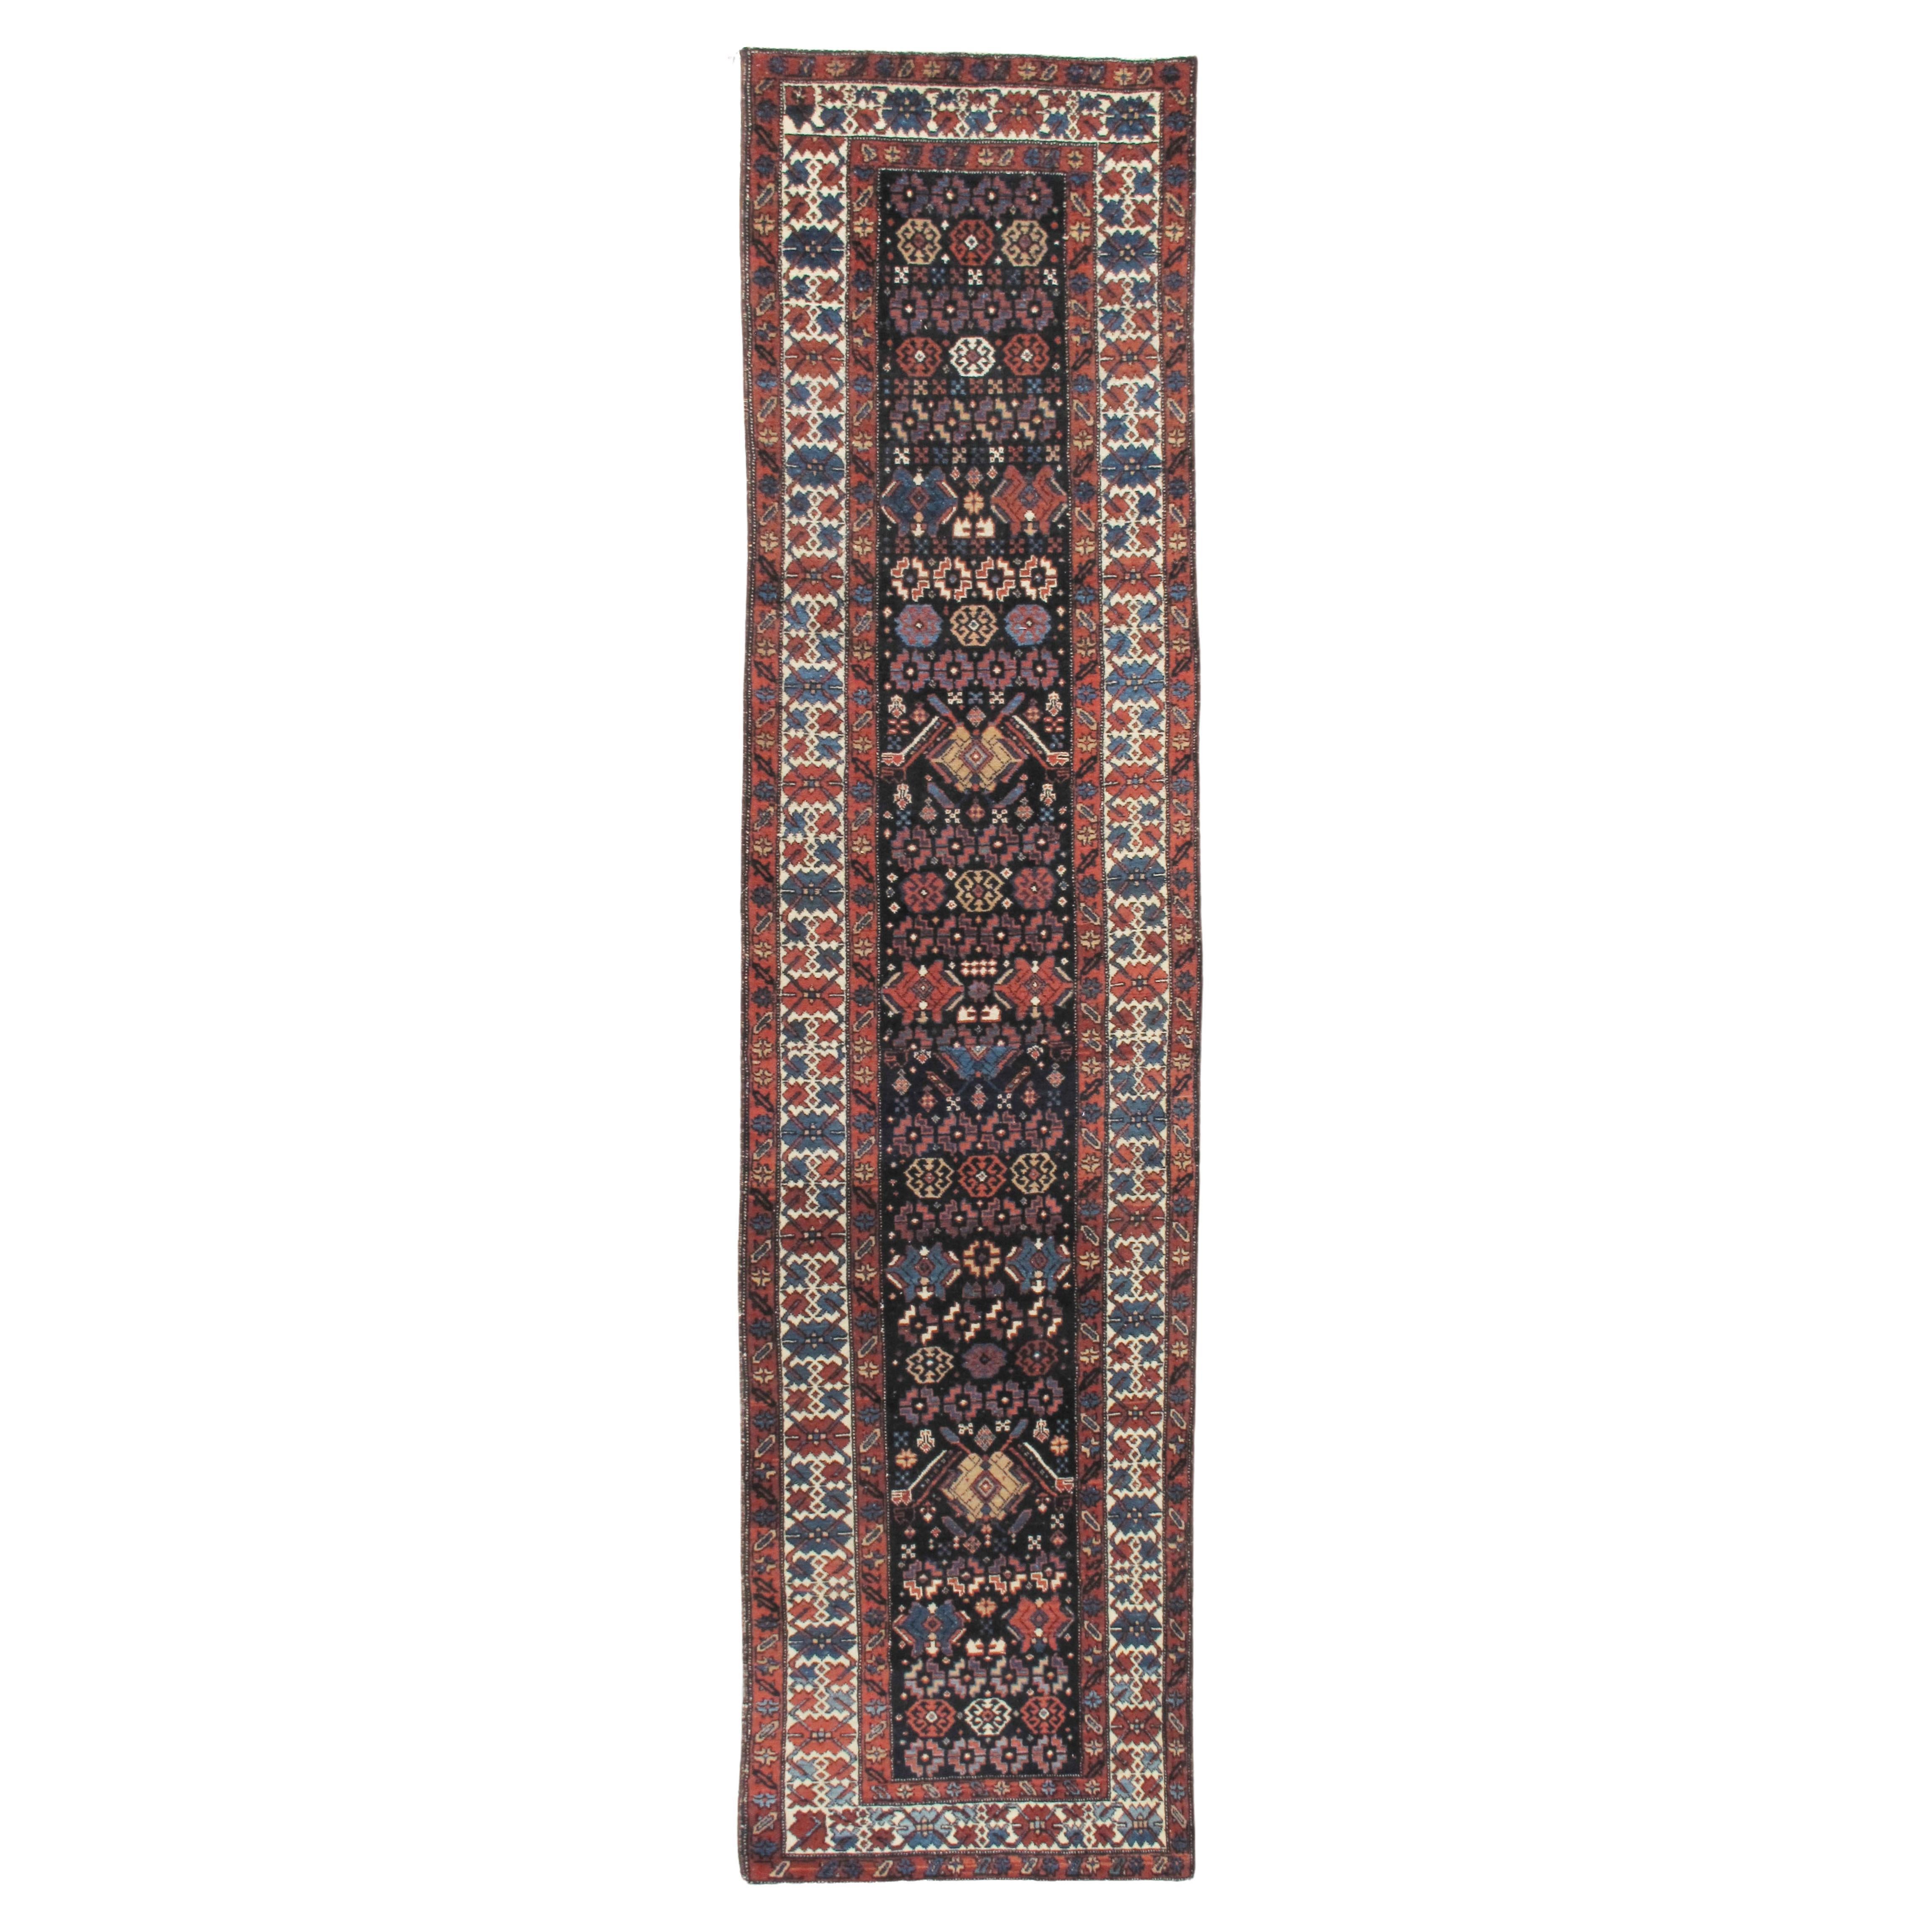 Antique N.W. Persian Runner 2'9 x 12'11 For Sale